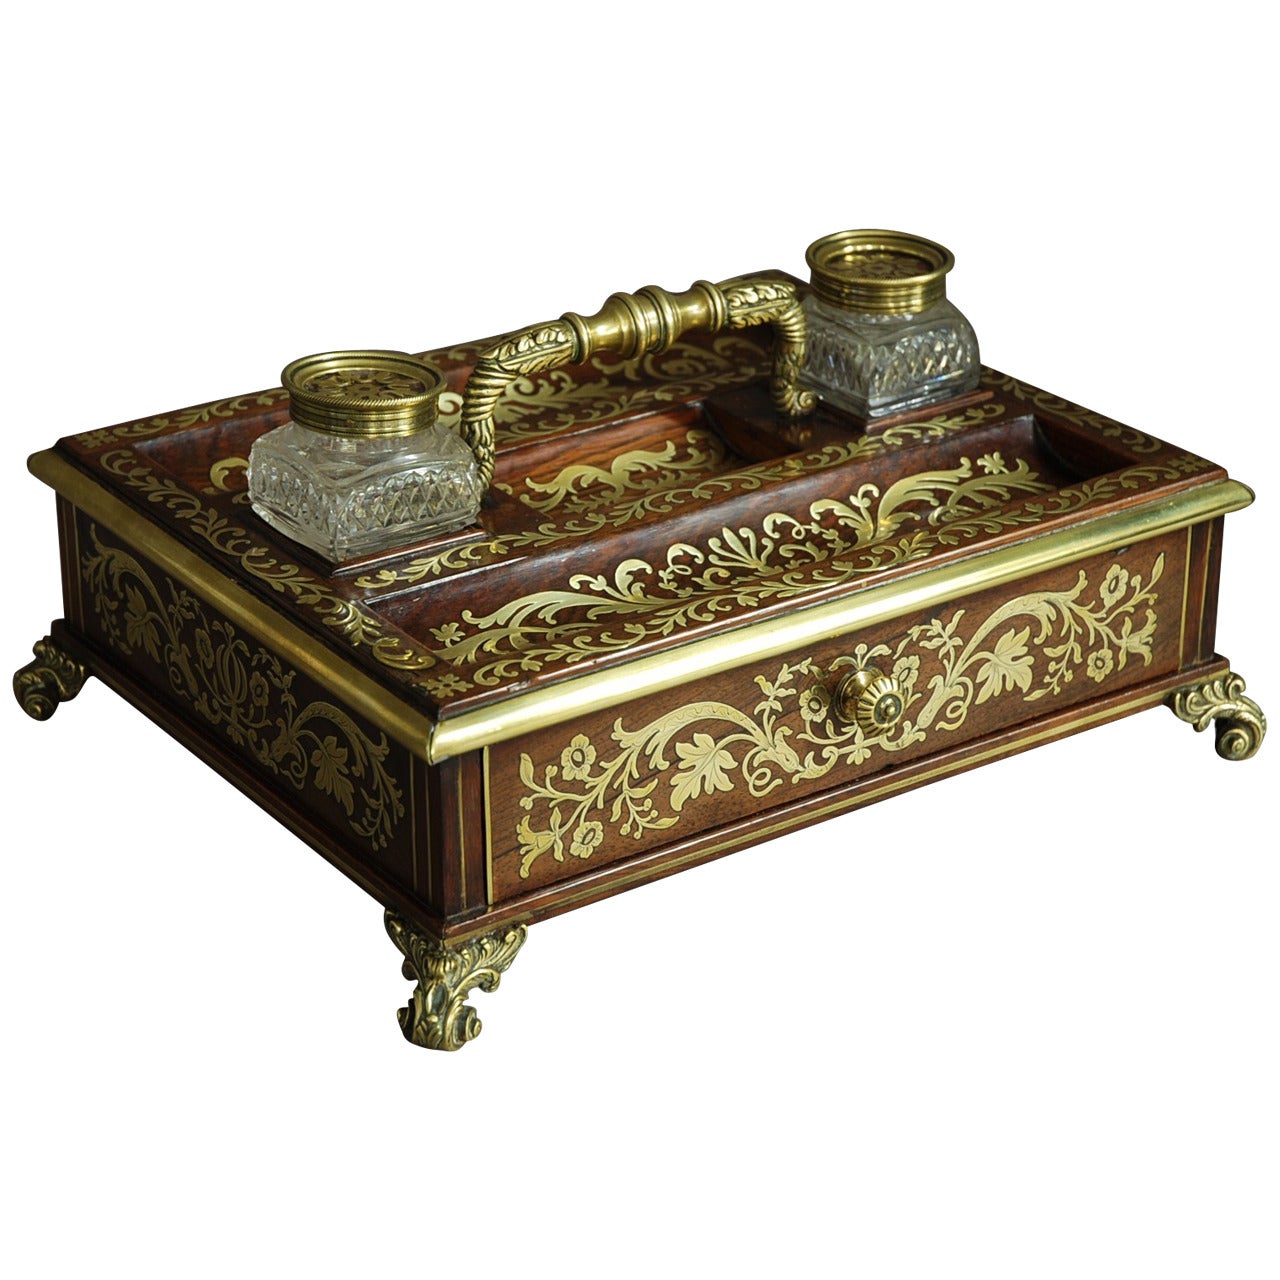 Regency Rosewood and Inlaid Brass Desk Stand/Inkstand For Sale